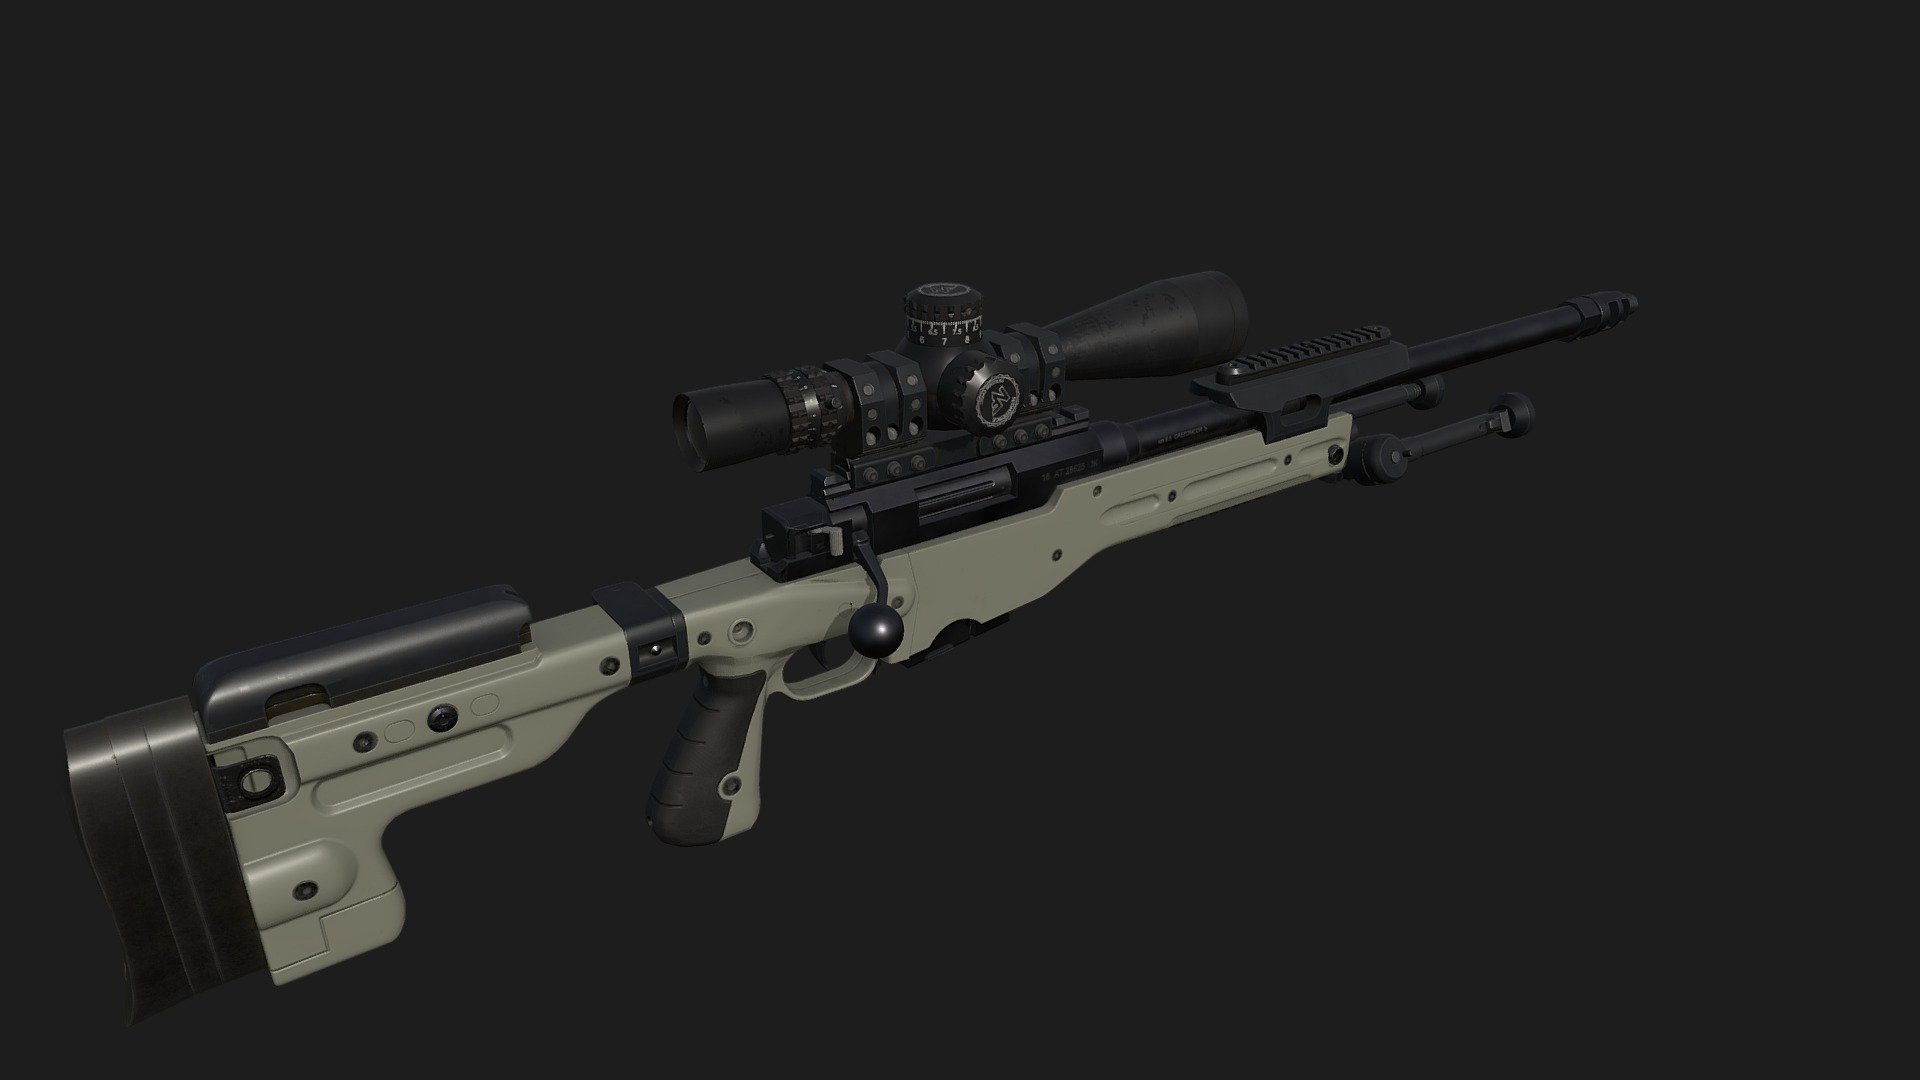 Low Poly Sniper
Modelling: 3ds Max
Sculpting: ZBrush
Texturing: Substance Painter, Photoshop 3d model